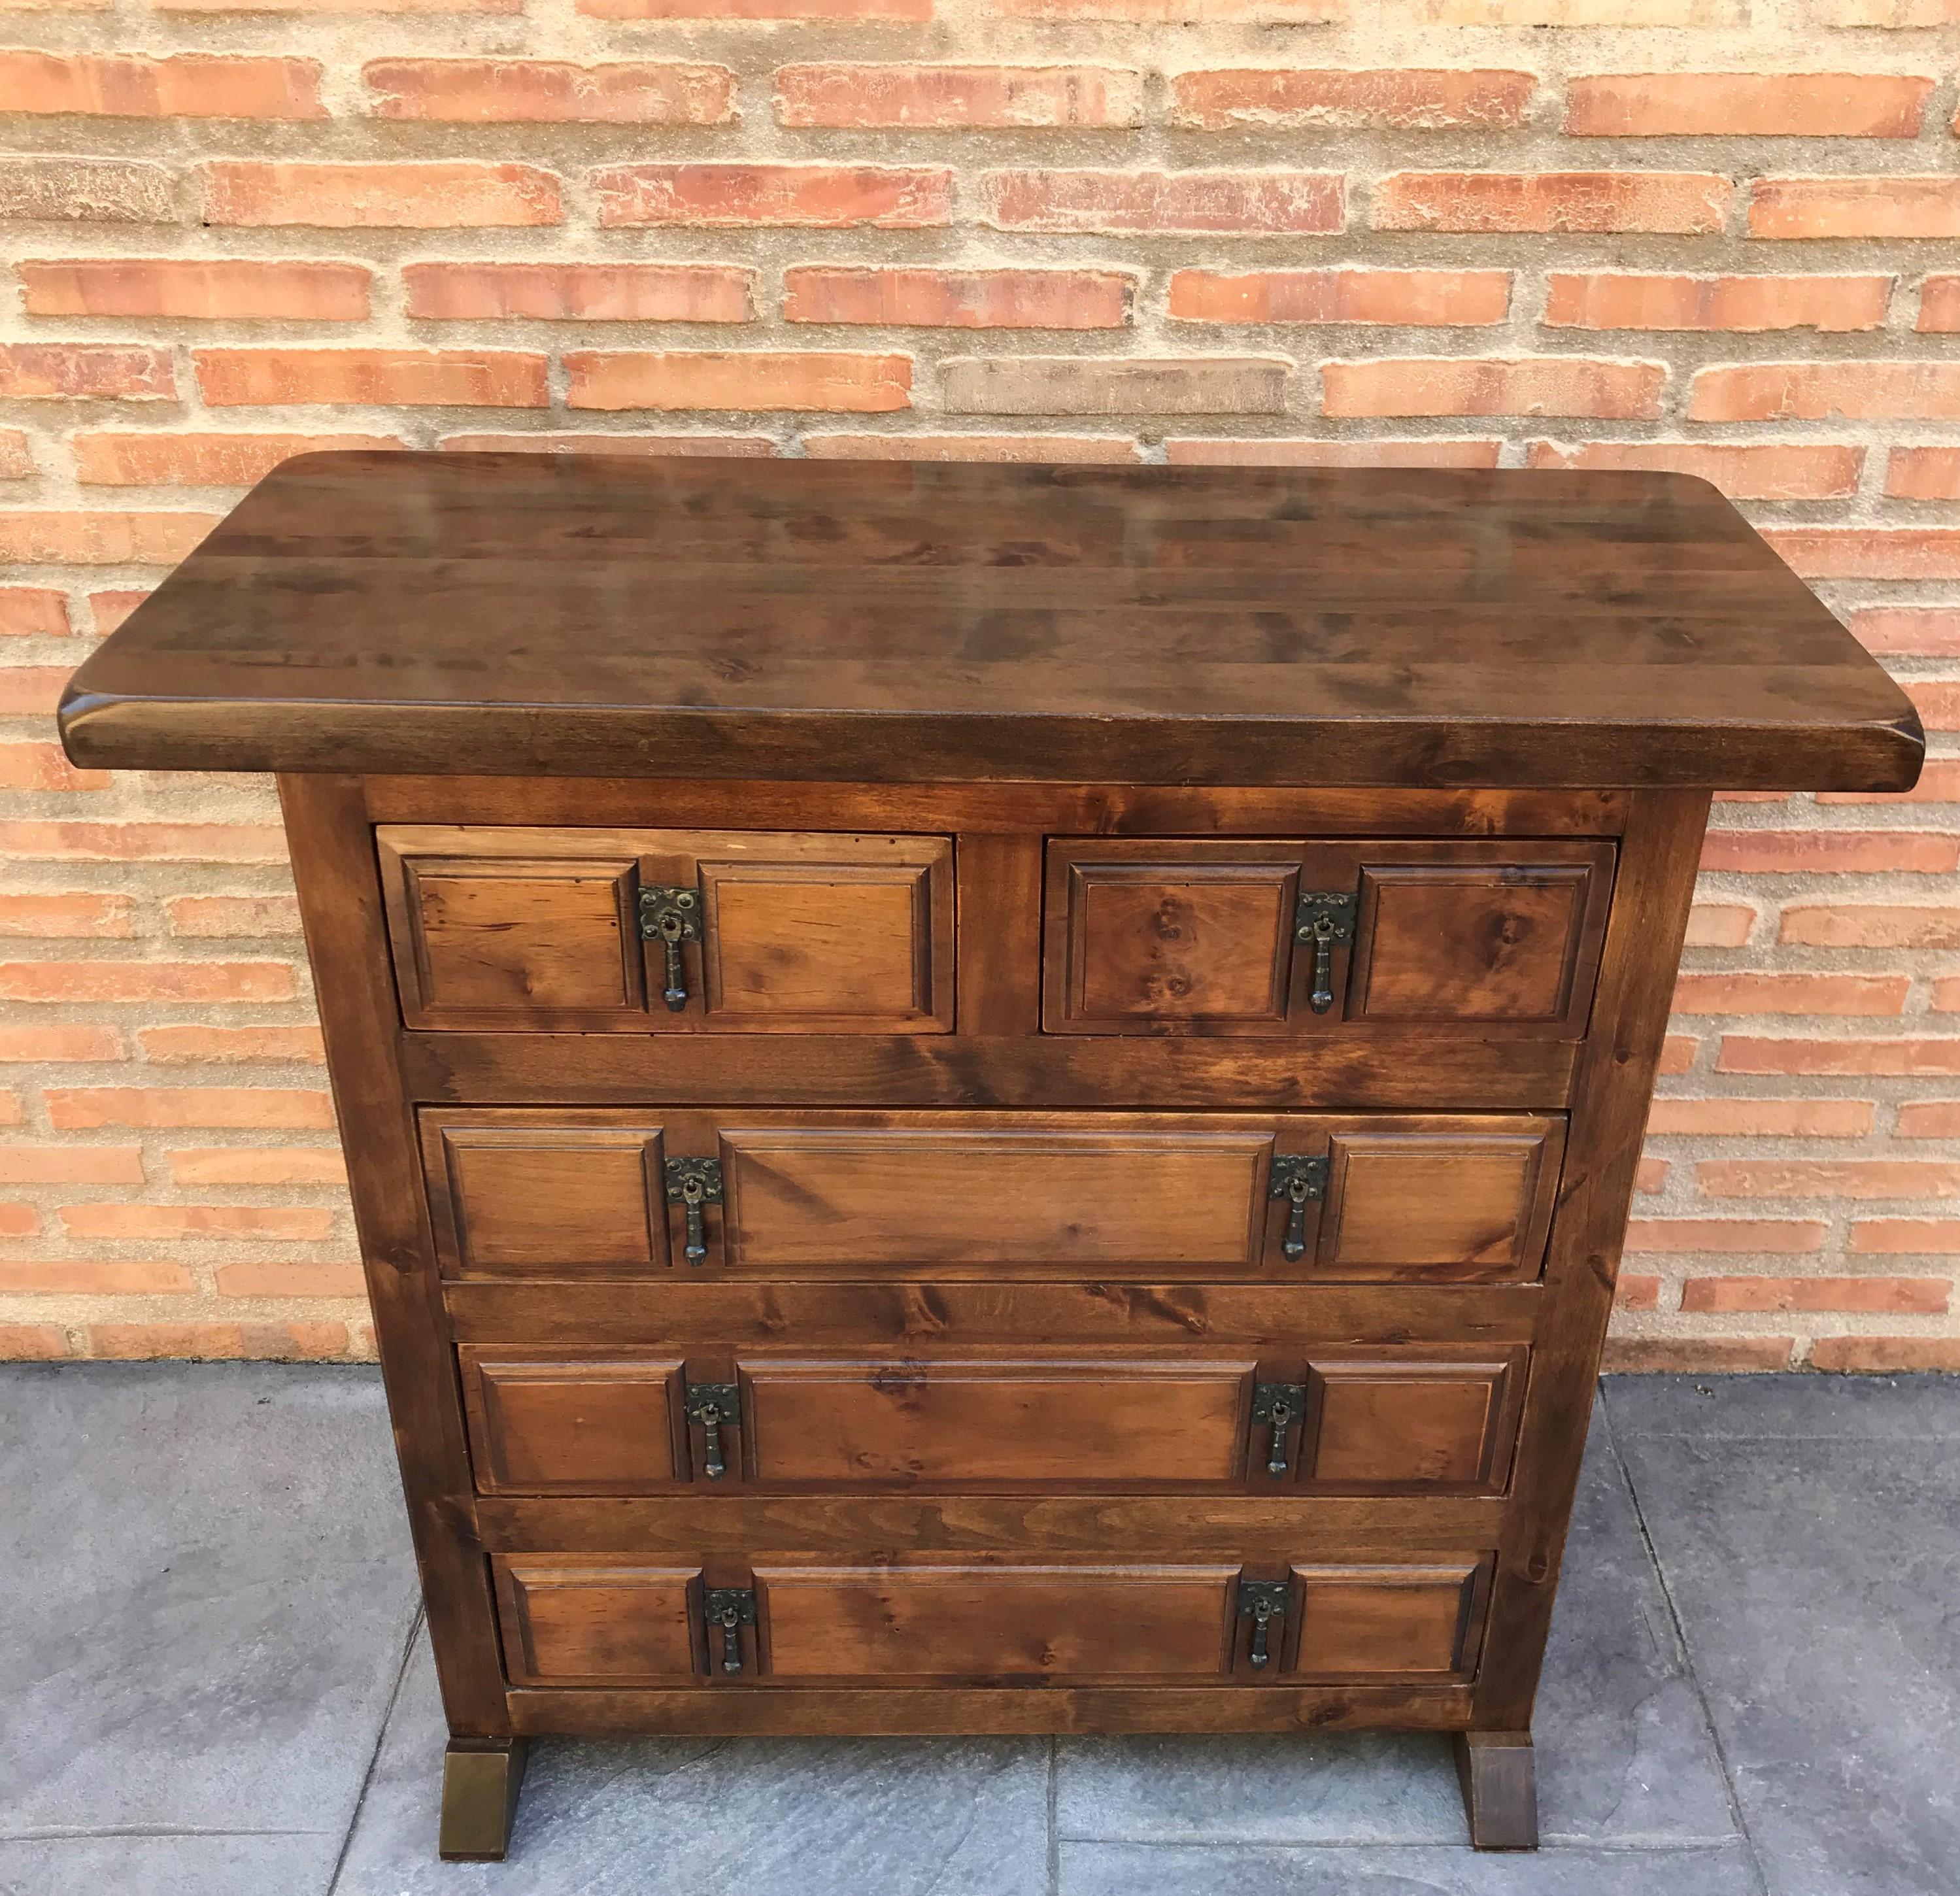 20th century Catalan Spanish carved walnut chest of drawers, highboy or console
Country Provincial Chiffoniere was fashioned from solid walnut and features five drawers carved with charming detail and fitted with unusually intricate cast brass